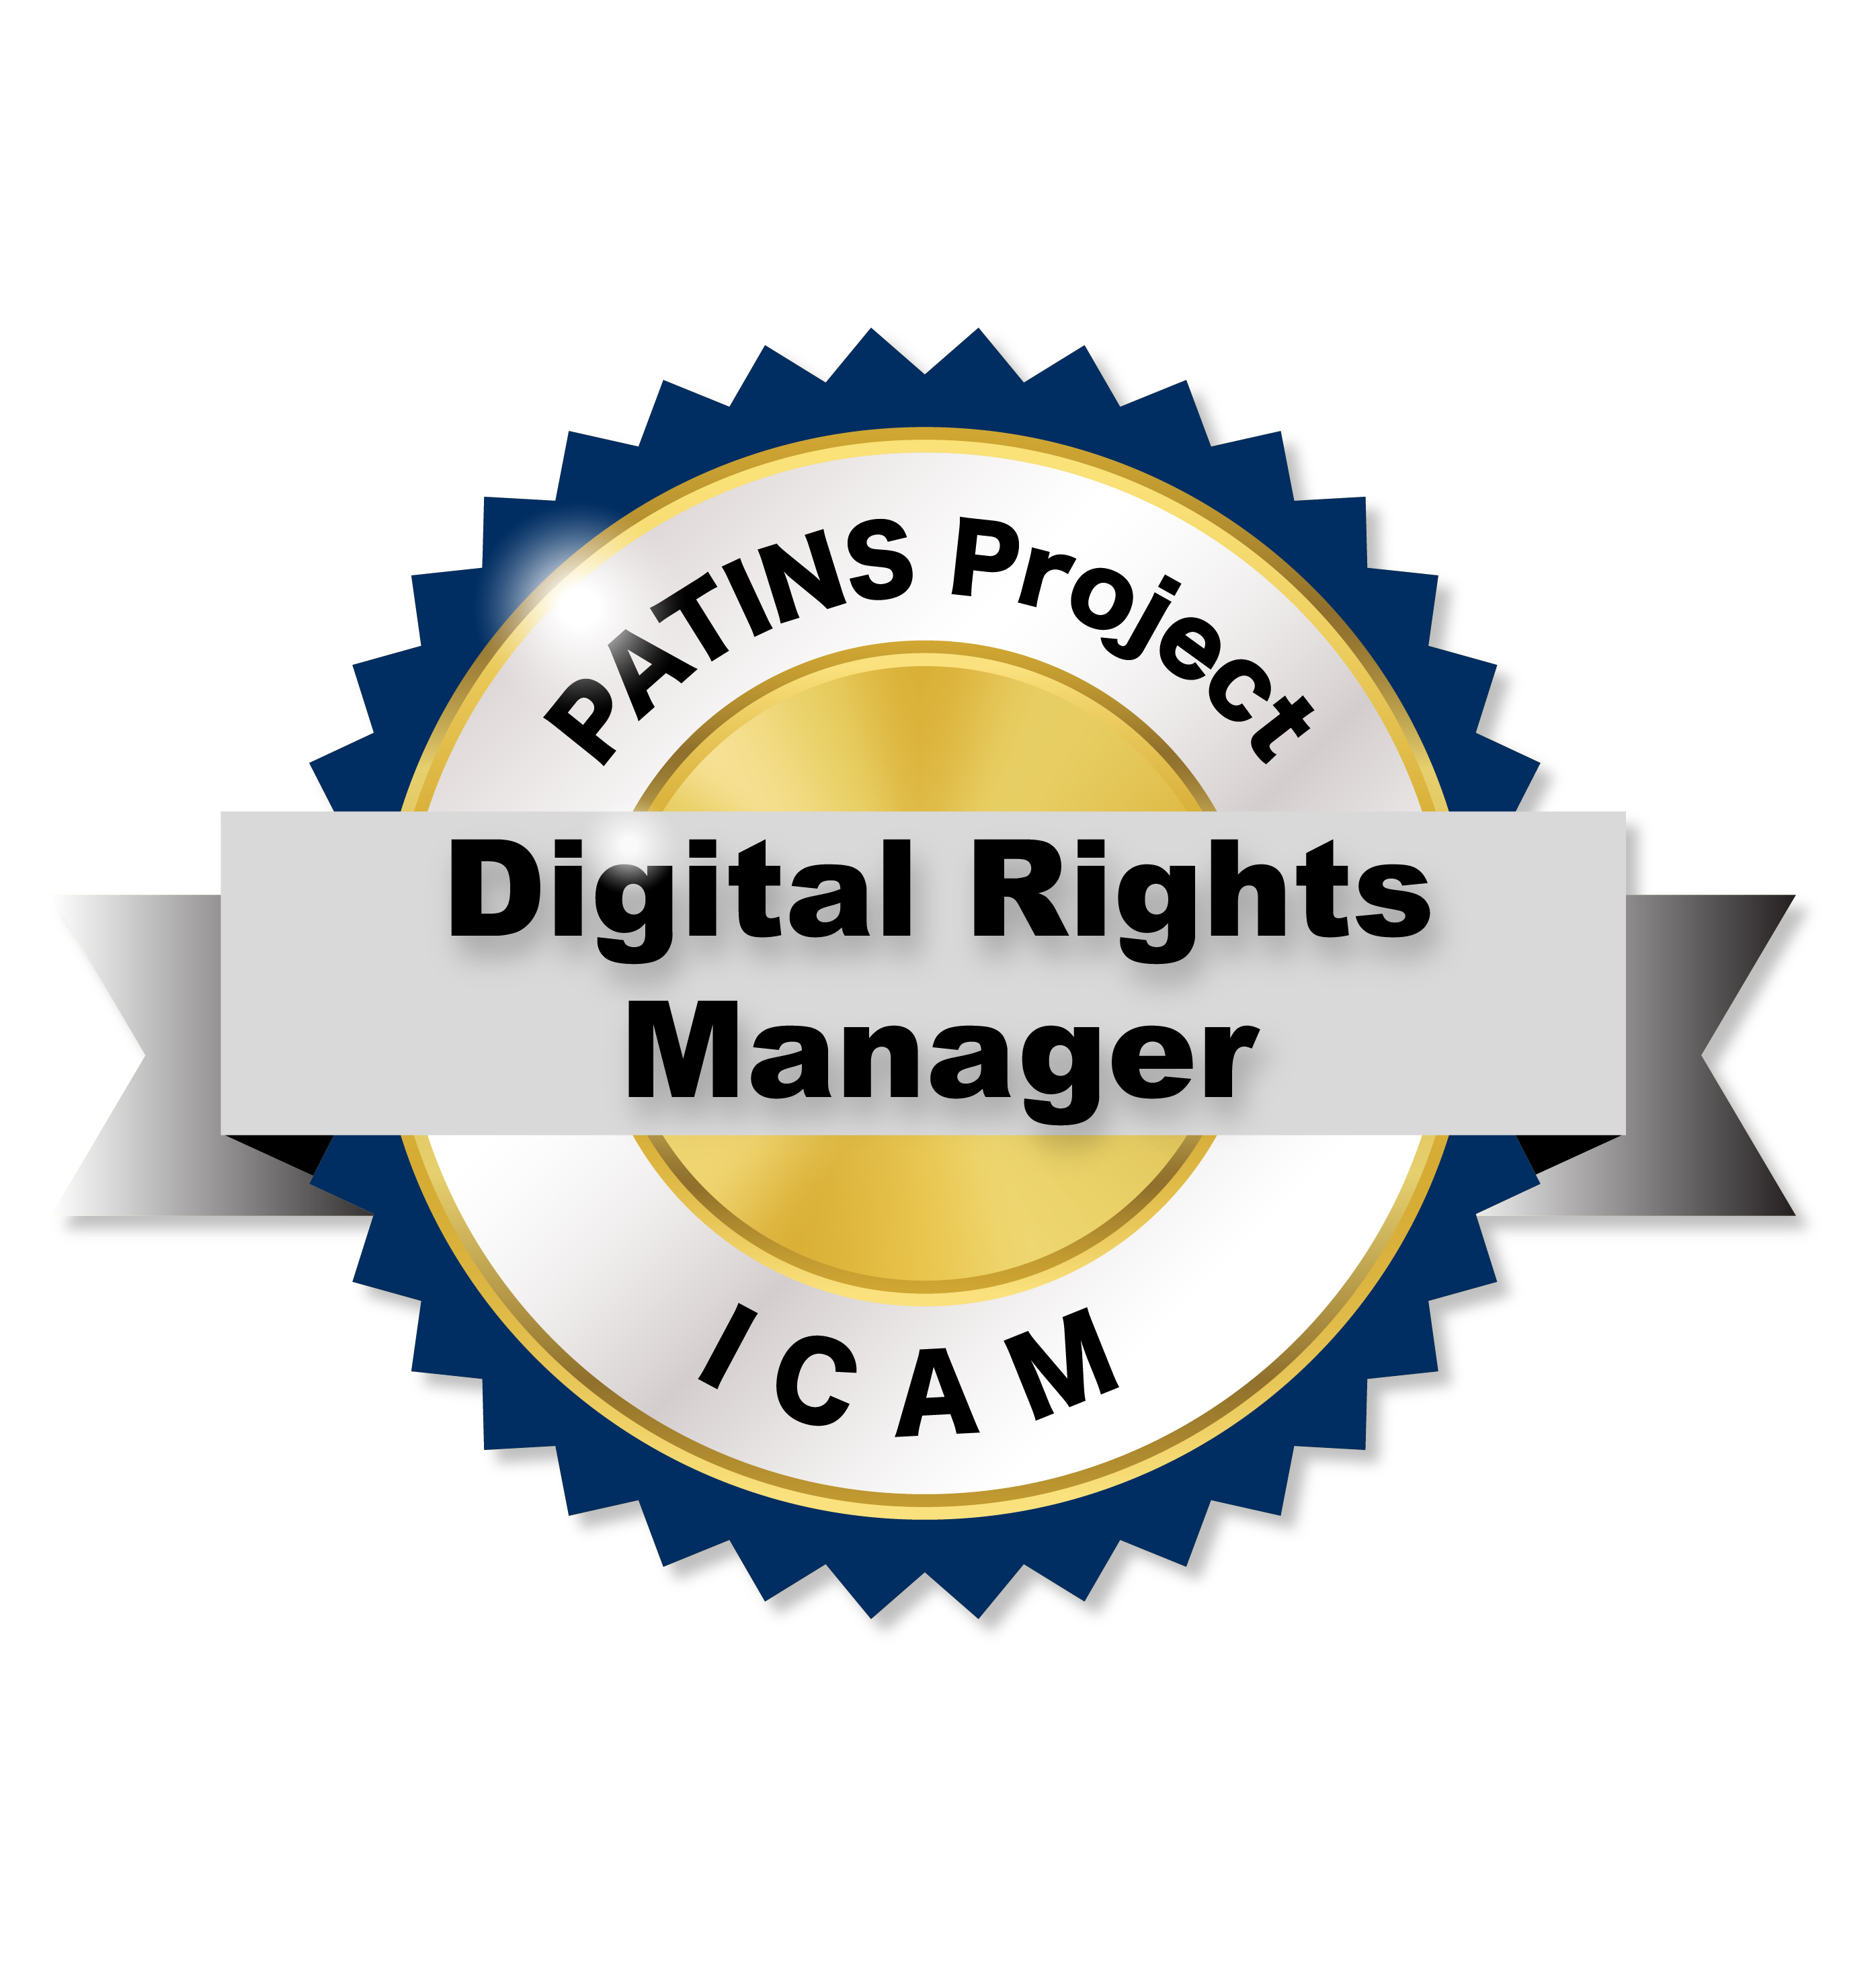 PATINS Project/ICAM Digital Rights Manager Badge for email